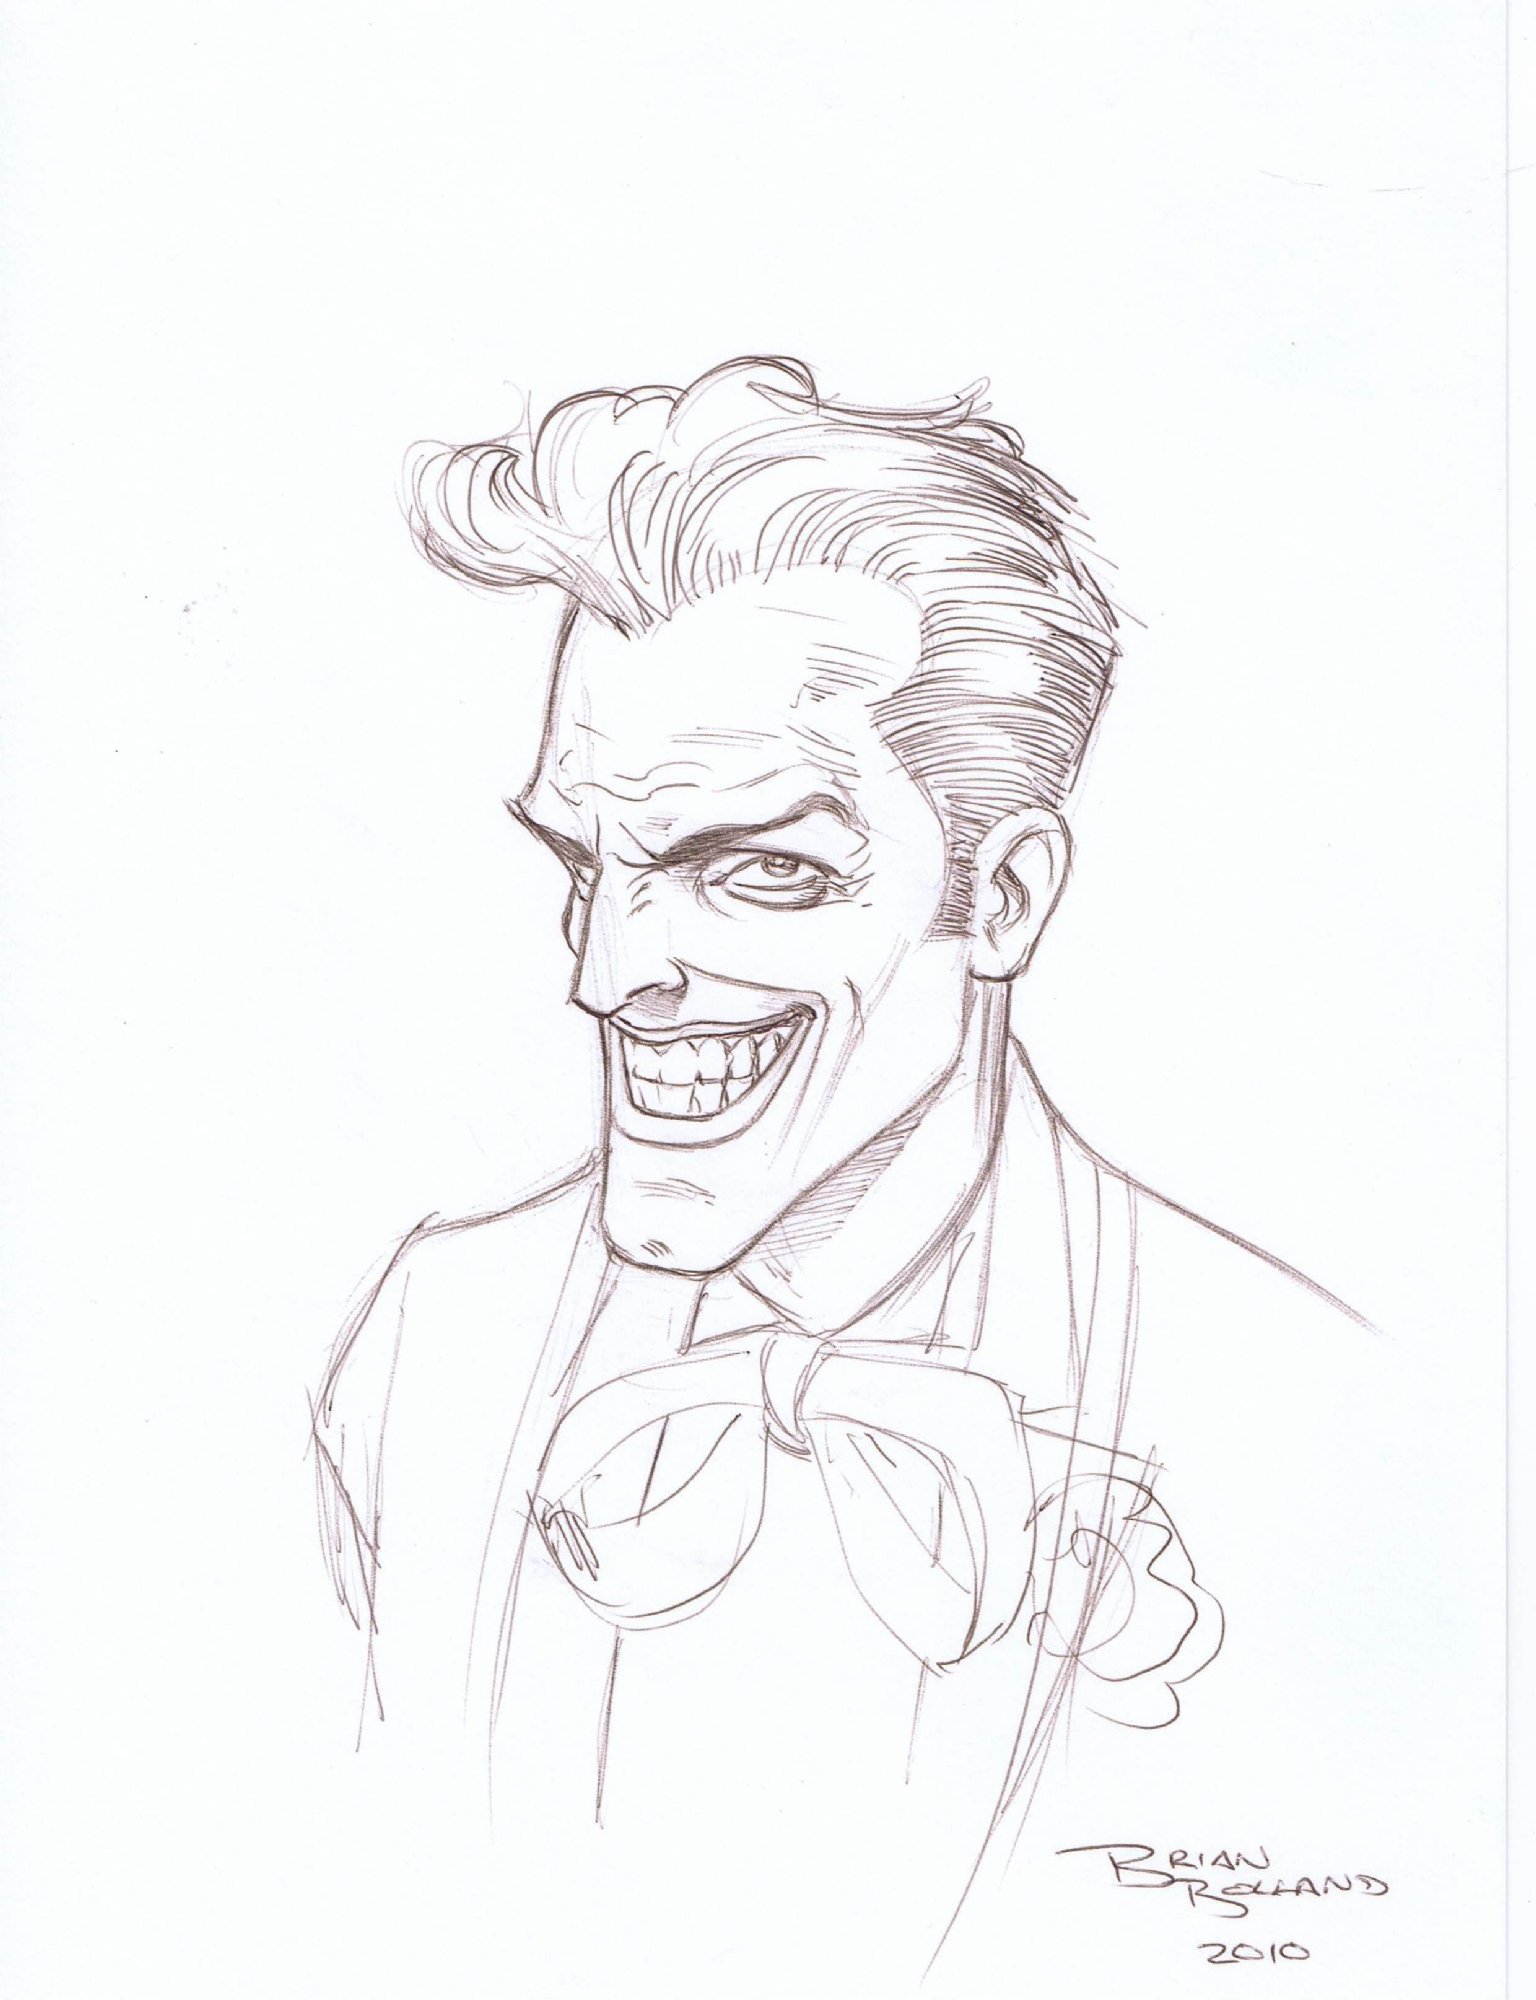 Joker Sketch By Brian Bolland 2010 In Dave Kopeckis Joker And Harley Quinn Sketches And 6017